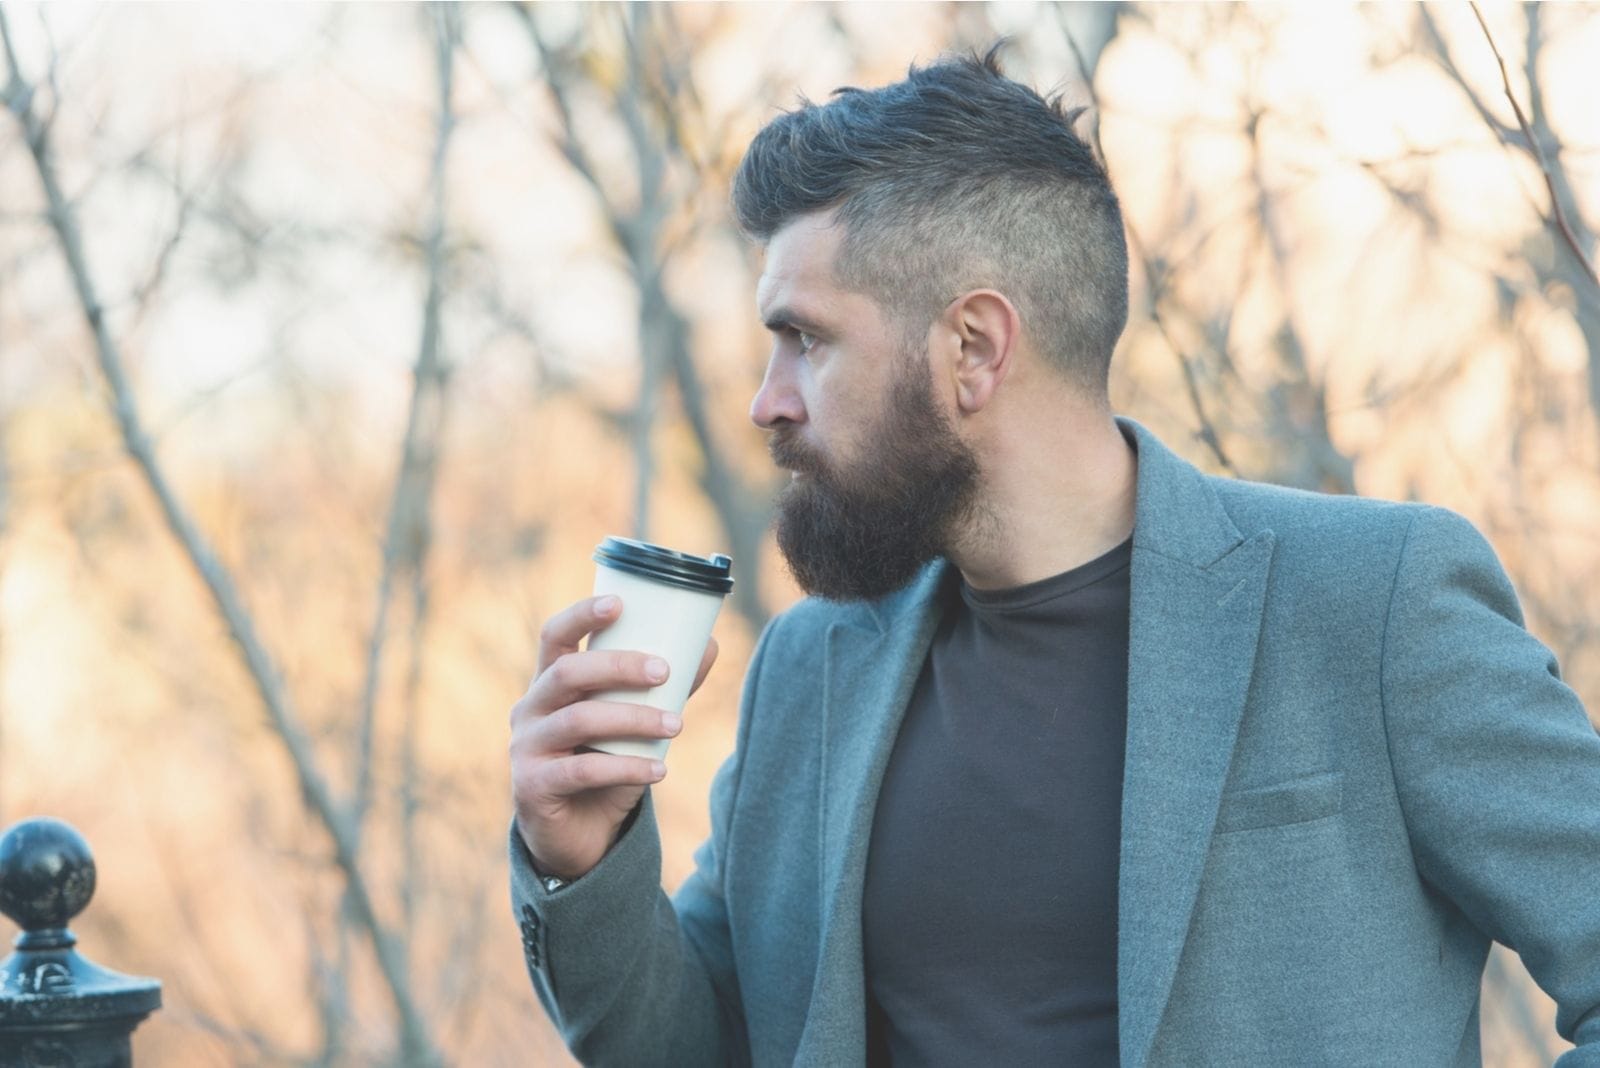 morning inspiration of a man drinking coffee outdoors thoughtful and looking away